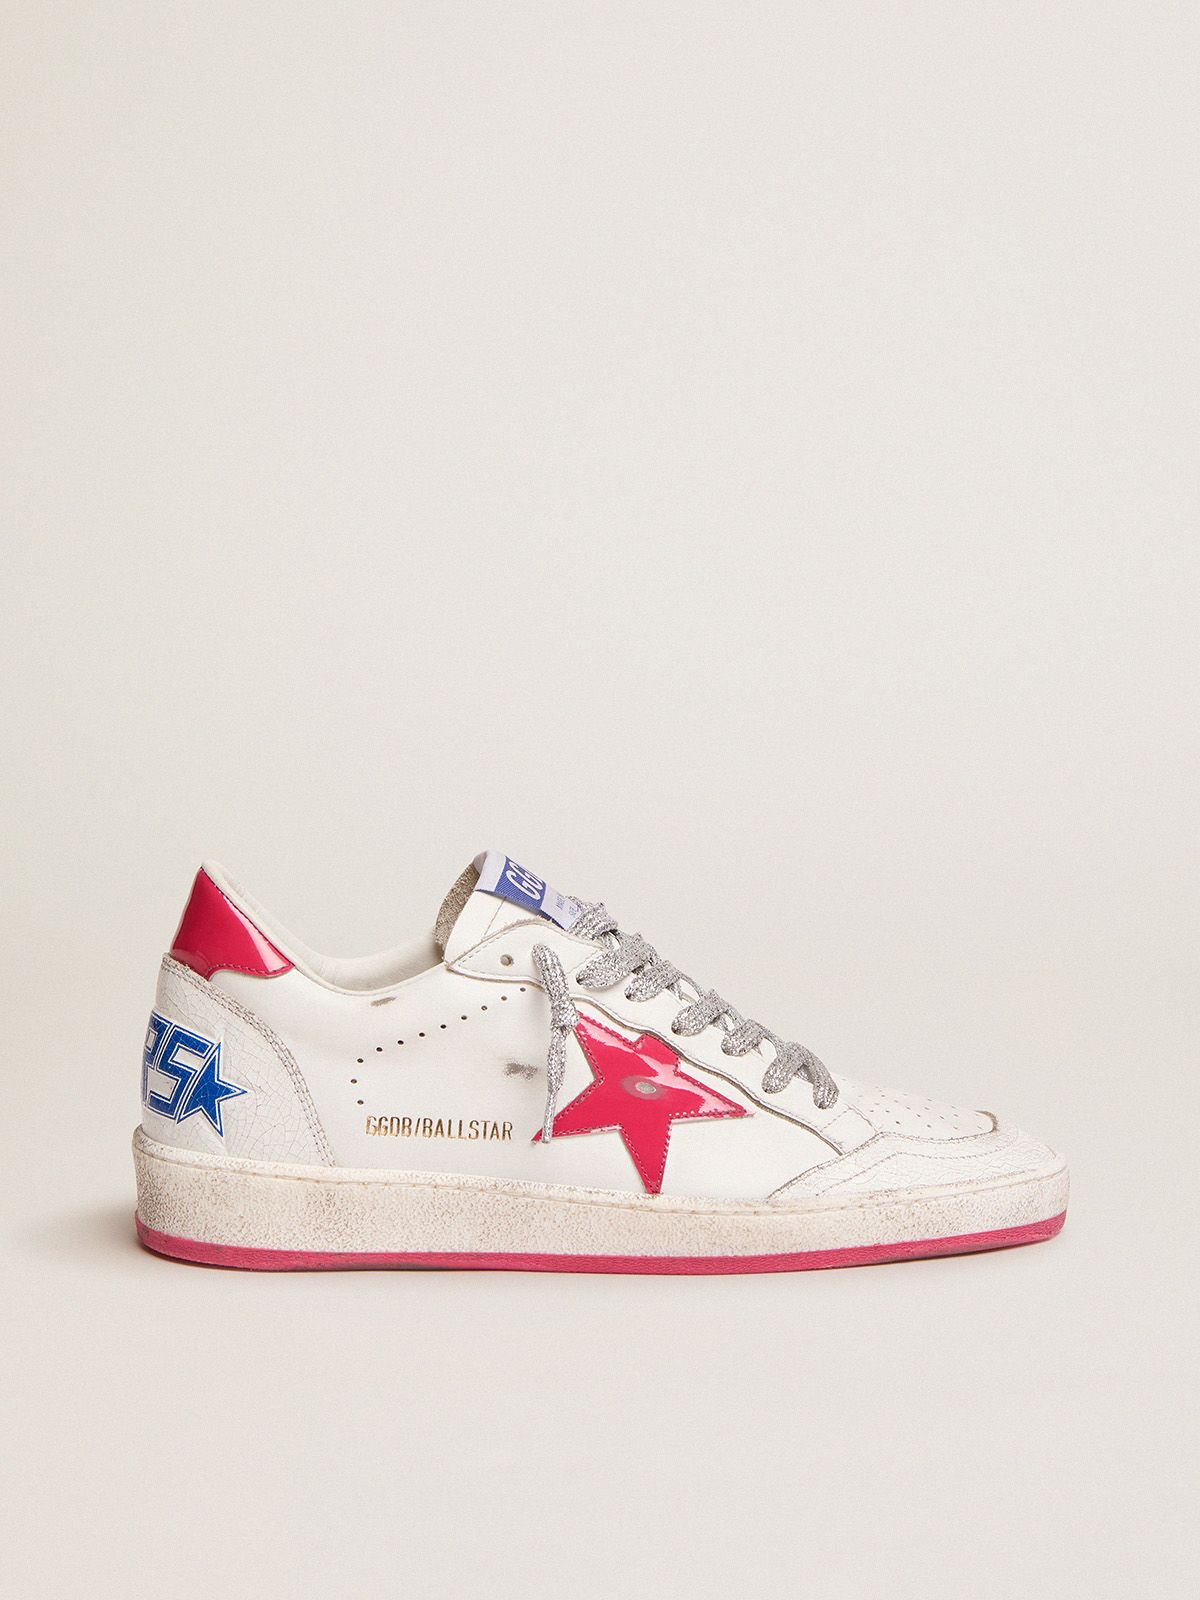 golden goose with patent detail Star white in sneakers Ball leather red LTD